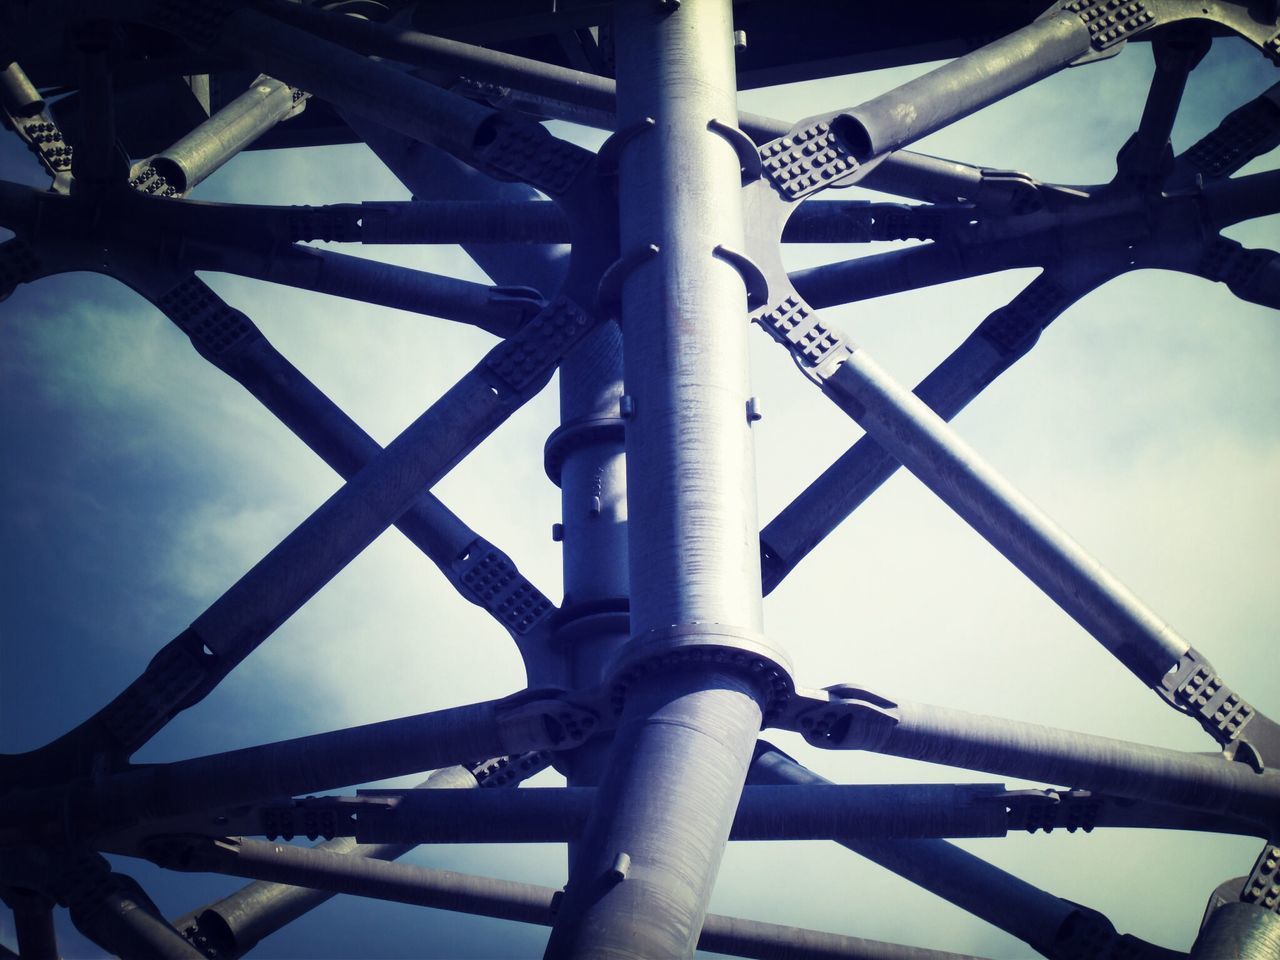 metal, metallic, low angle view, connection, sky, engineering, rusty, iron - metal, strength, bridge - man made structure, built structure, no people, outdoors, day, support, transportation, industry, close-up, safety, protection